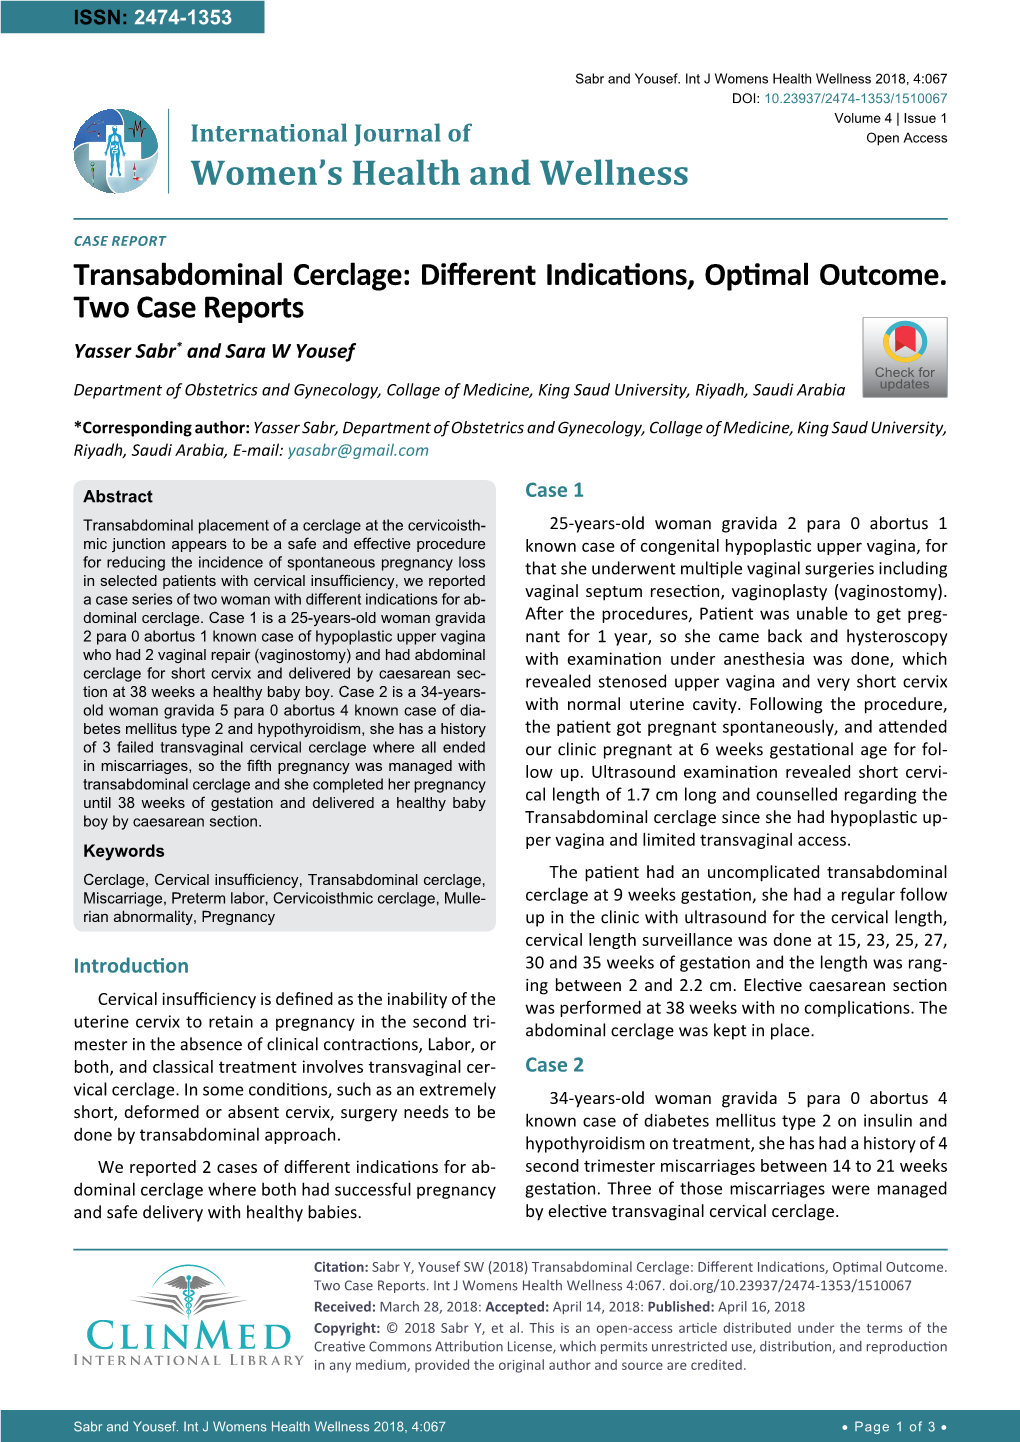 Transabdominal Cerclage: Different Indications, Optimal Outcome